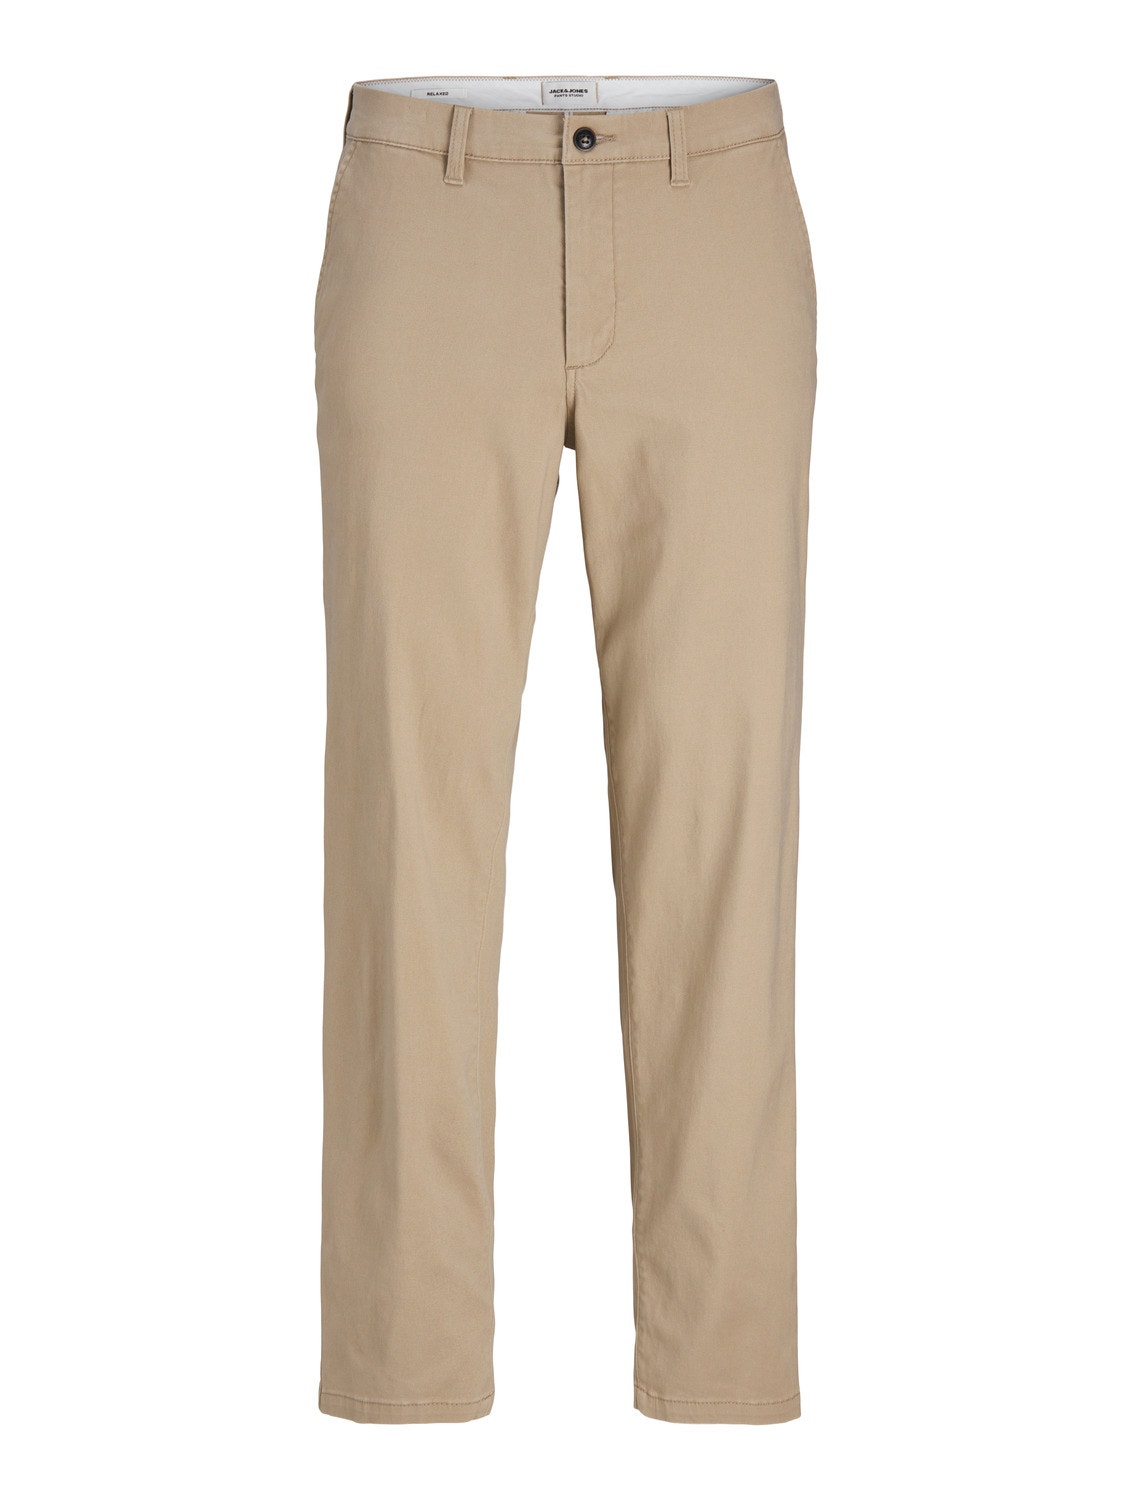 Jack & Jones Relaxed Fit Chino trousers -Crockery - 12212936